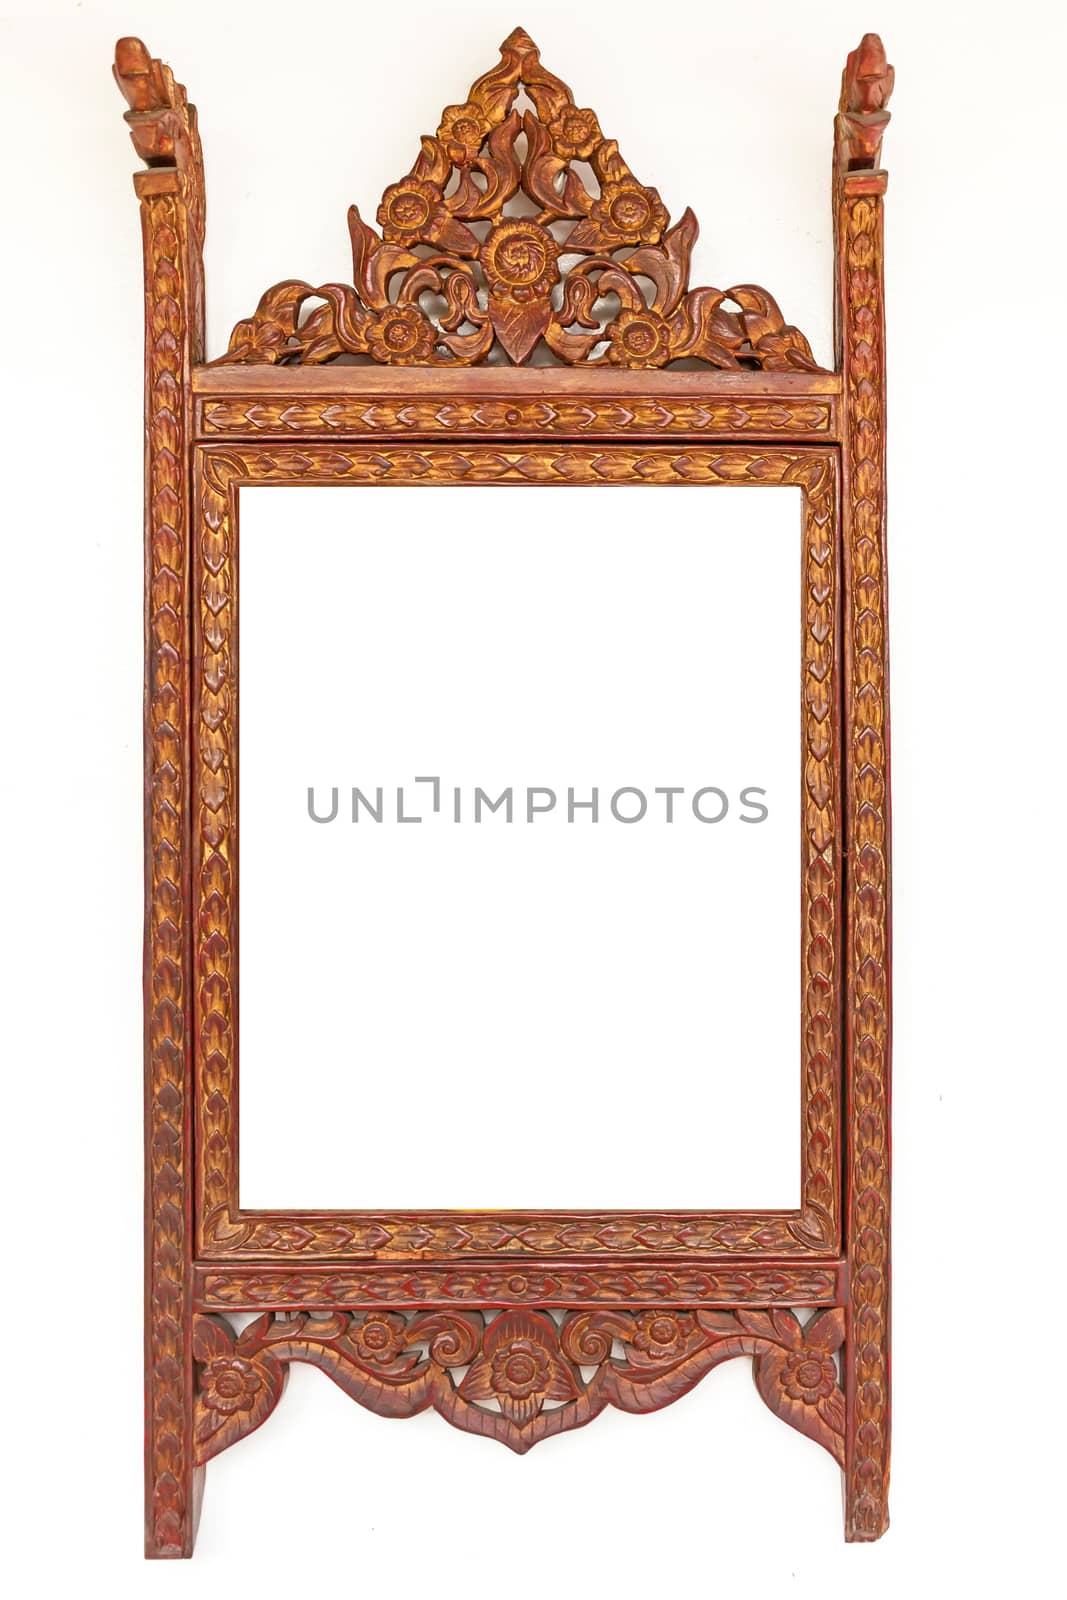 craft wood thai culture frame isolated on white by nopparats